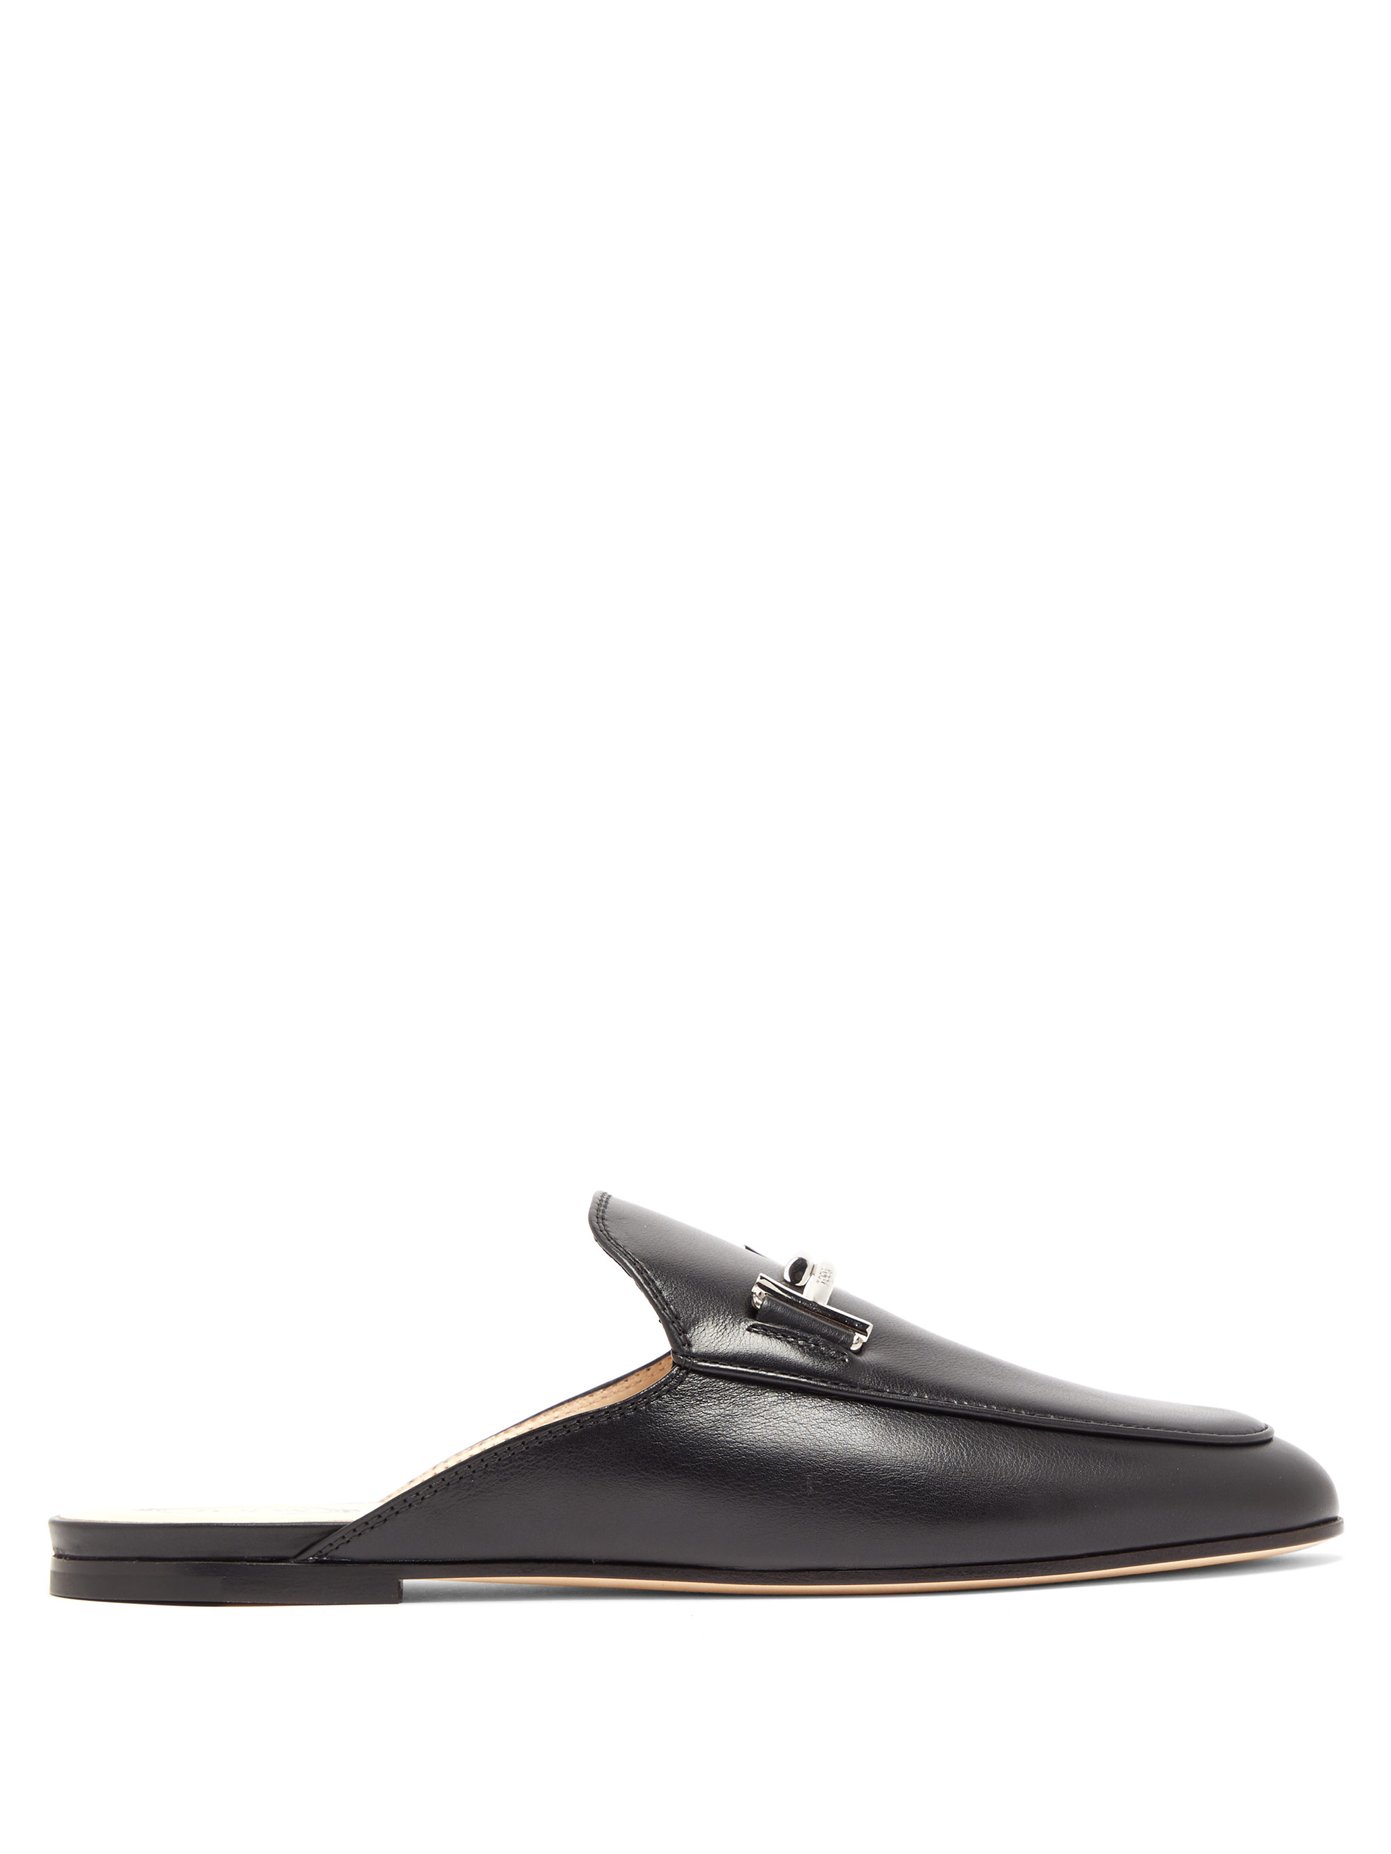 black leather backless loafers